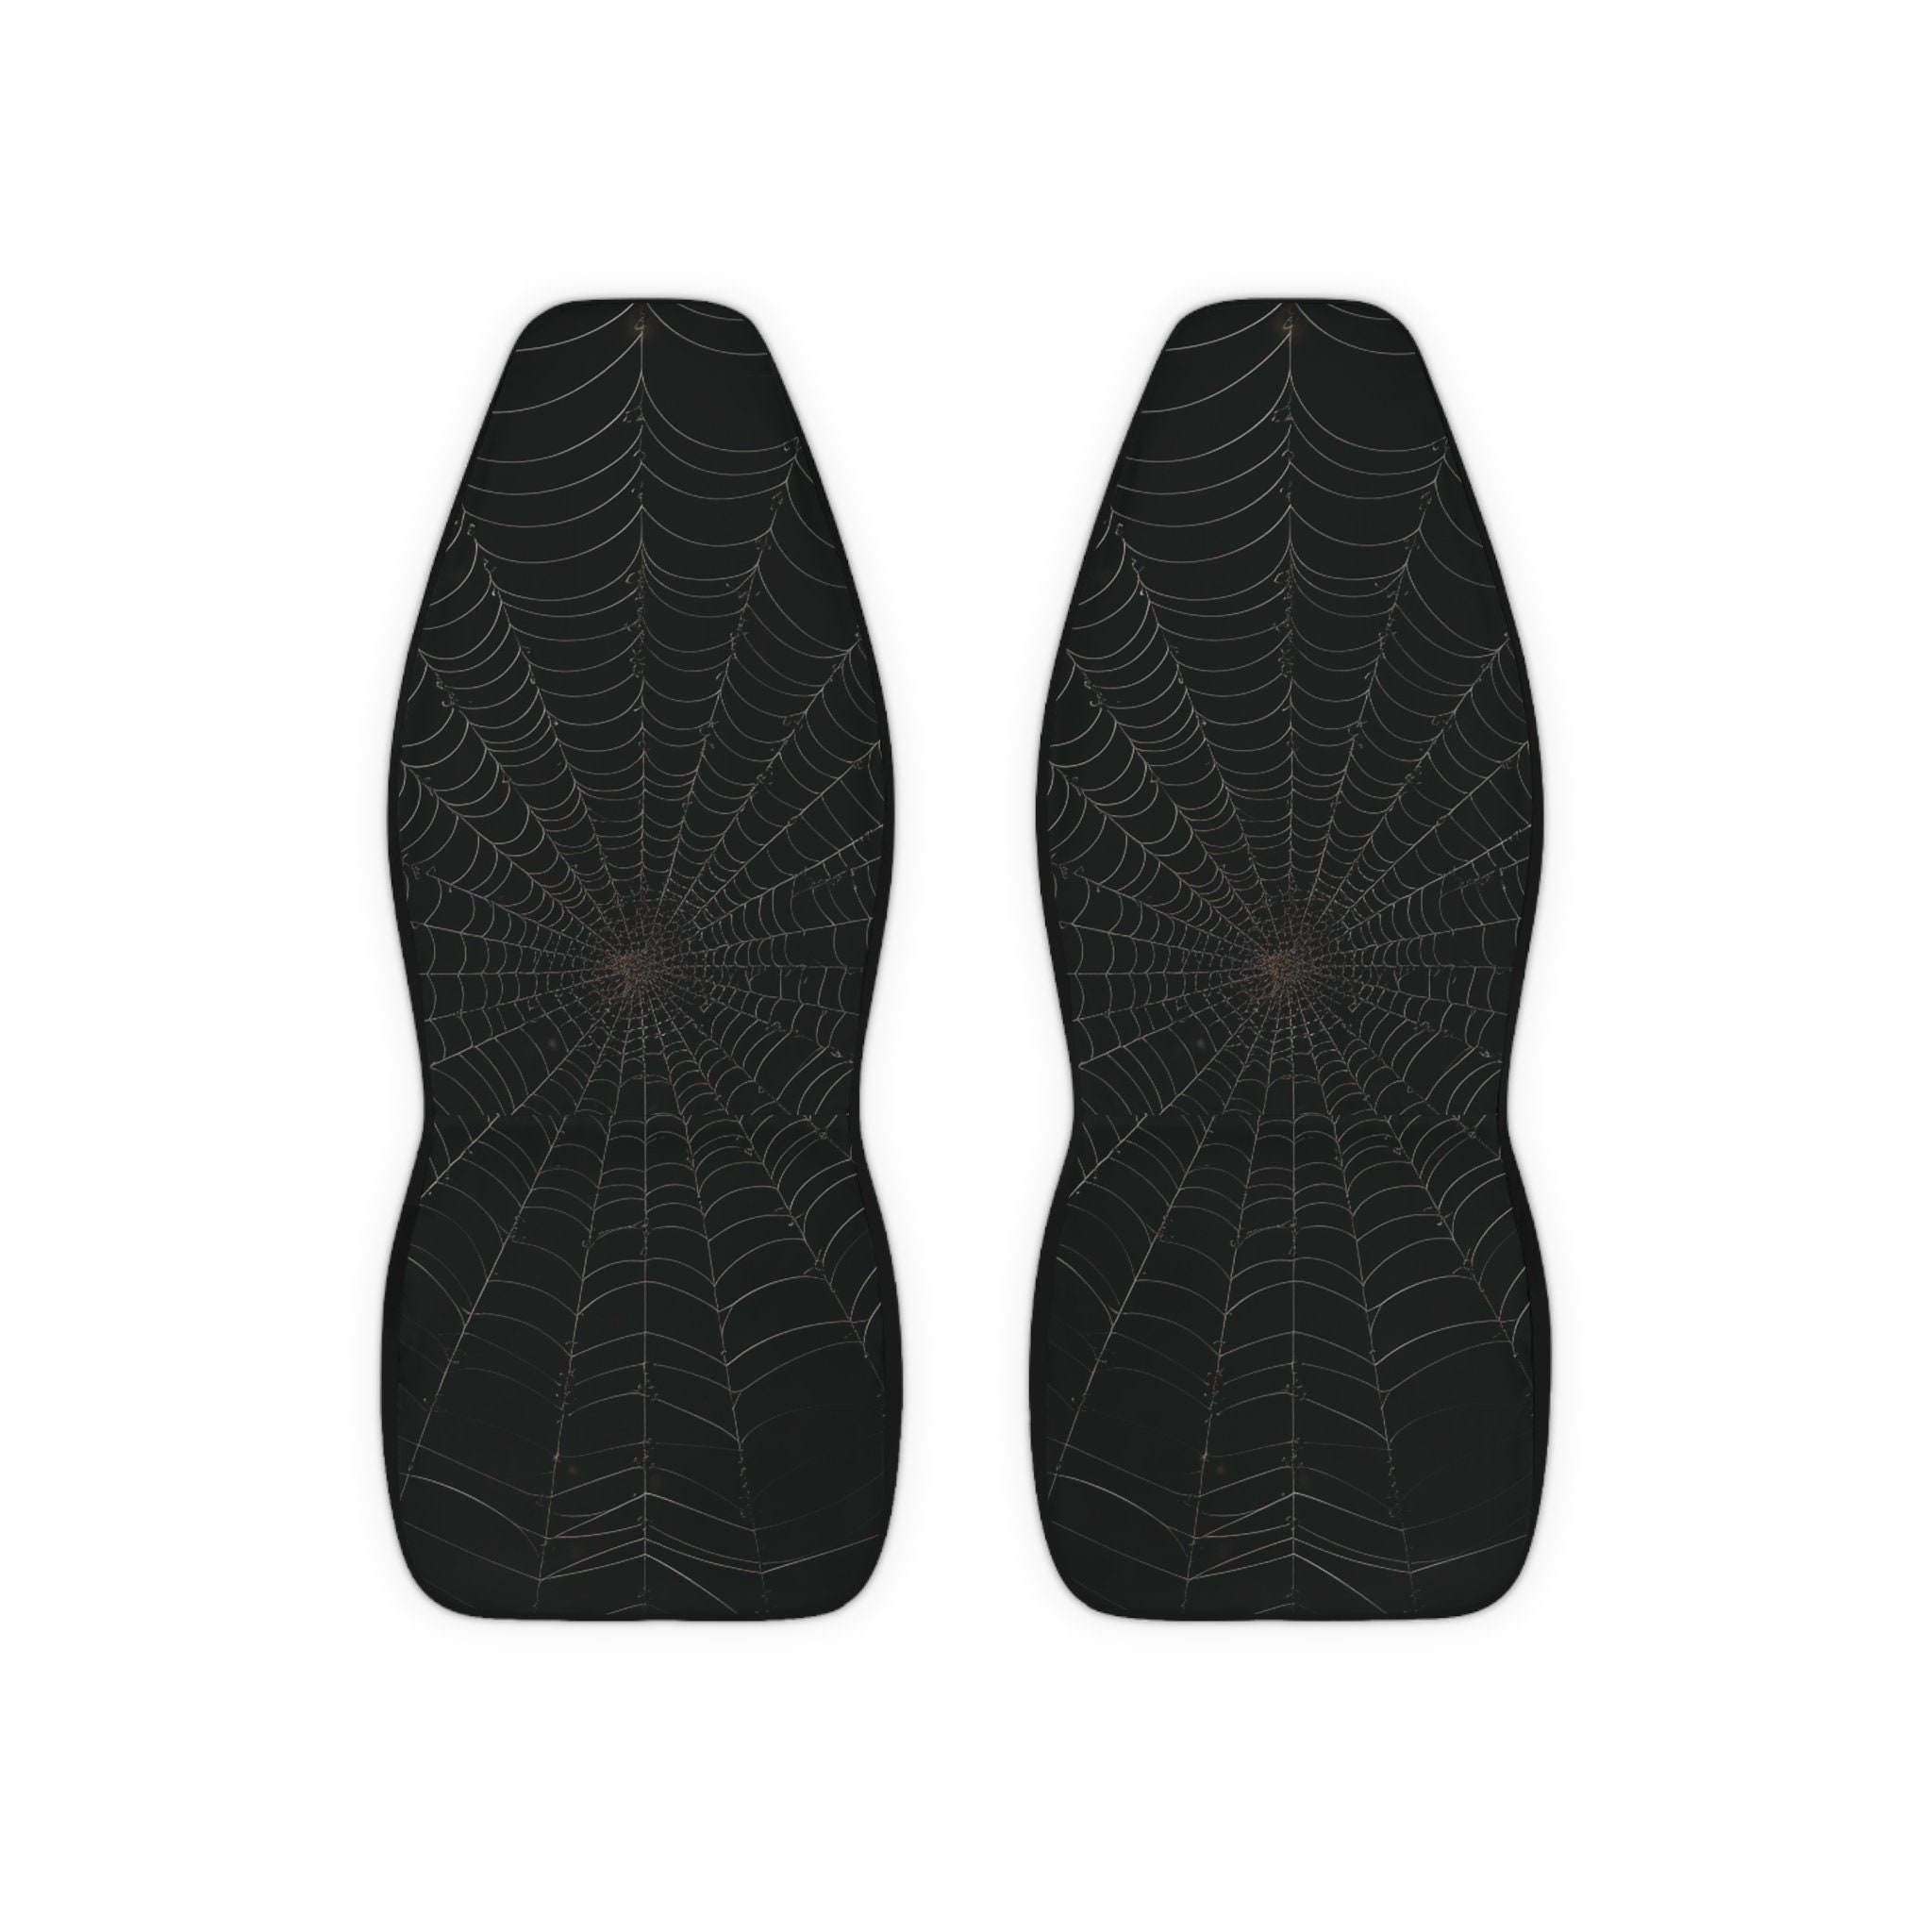 Black Spider Web Car Seat Protector, Spooky Goth Seat Cover